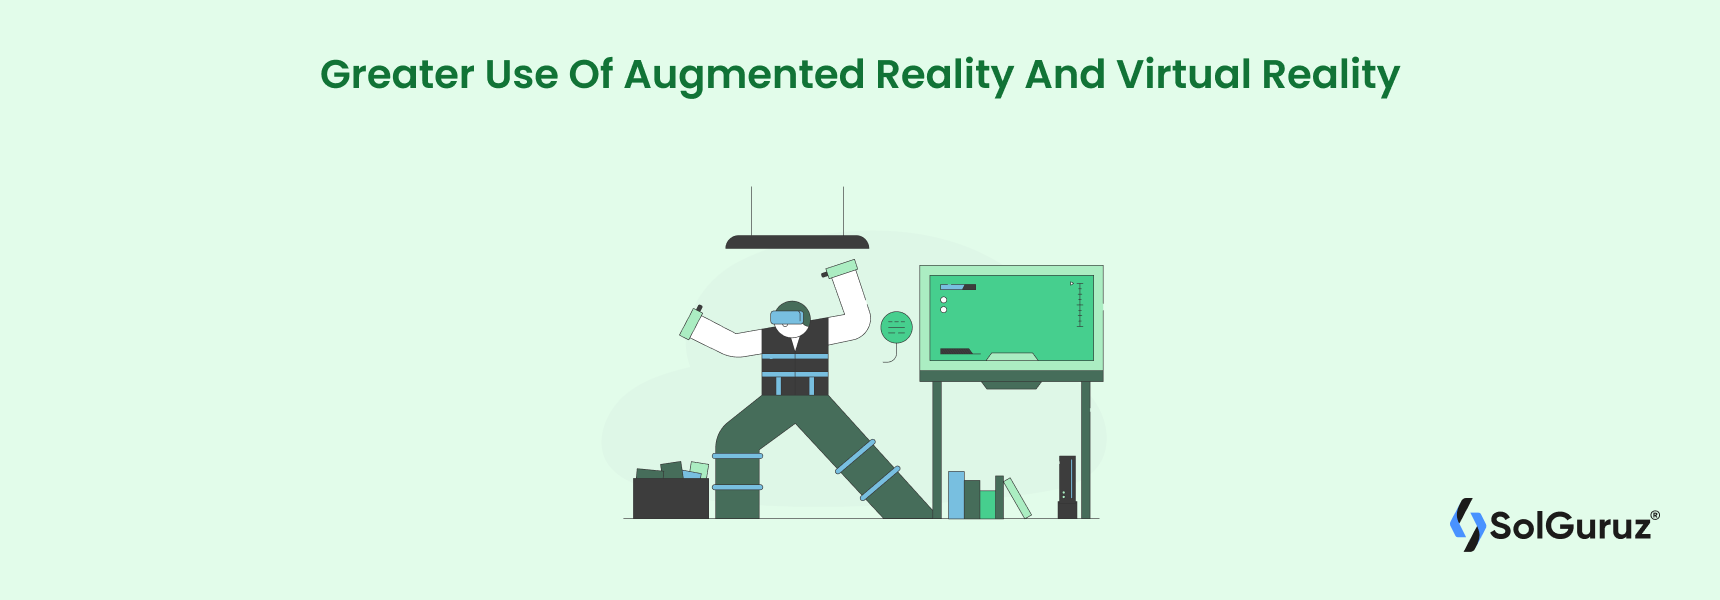 Greater Use Of Augmented Reality And Virtual Reality